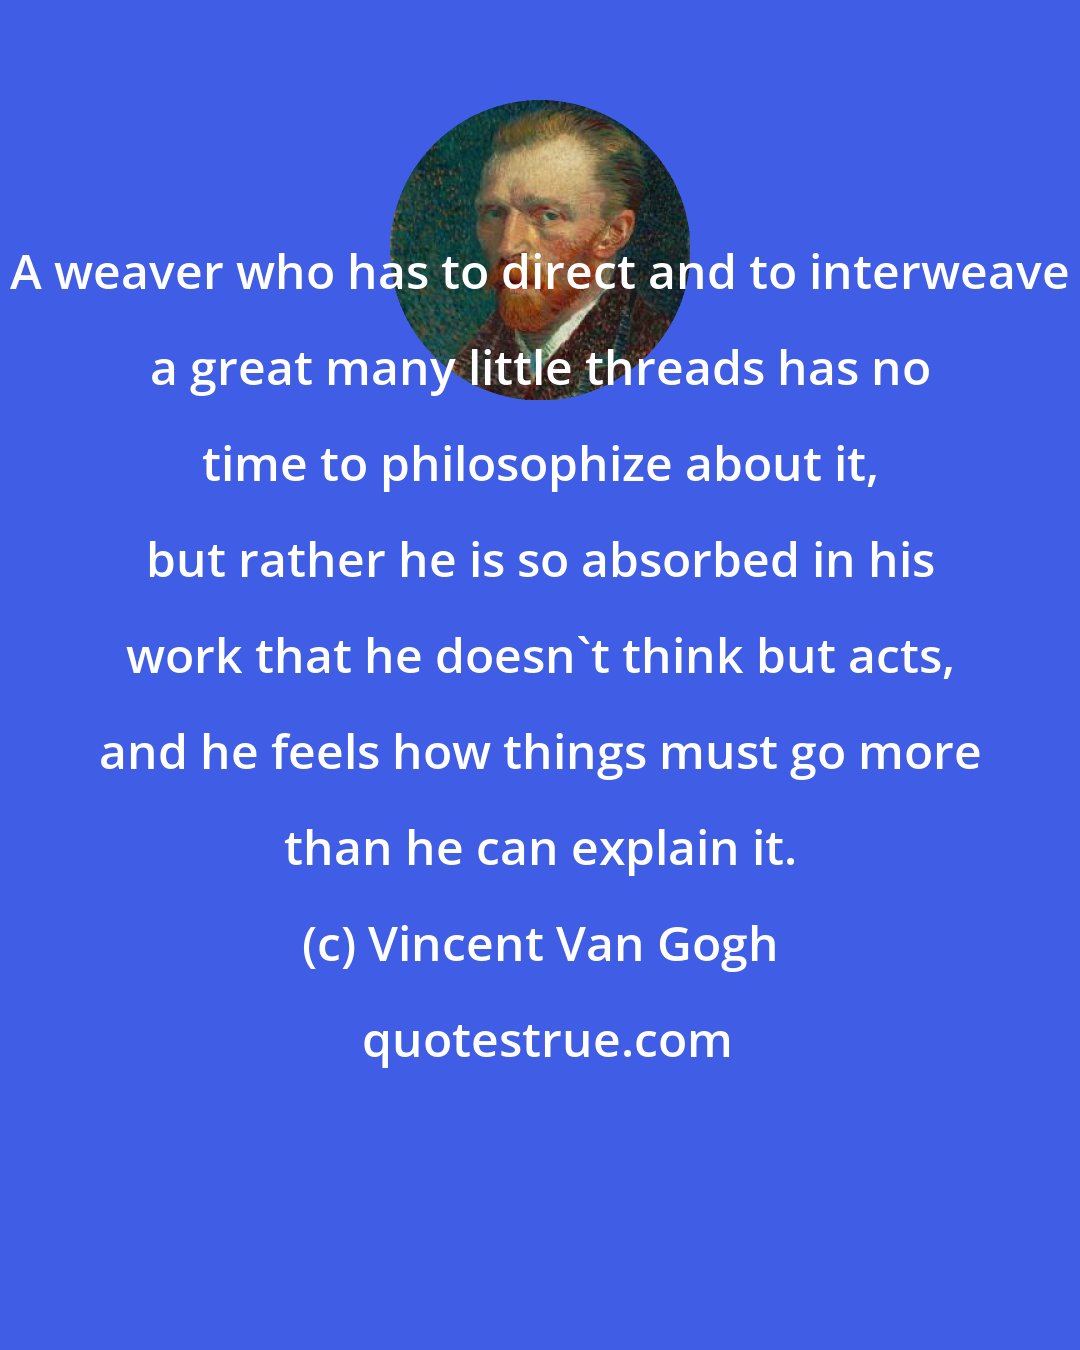 Vincent Van Gogh: A weaver who has to direct and to interweave a great many little threads has no time to philosophize about it, but rather he is so absorbed in his work that he doesn't think but acts, and he feels how things must go more than he can explain it.